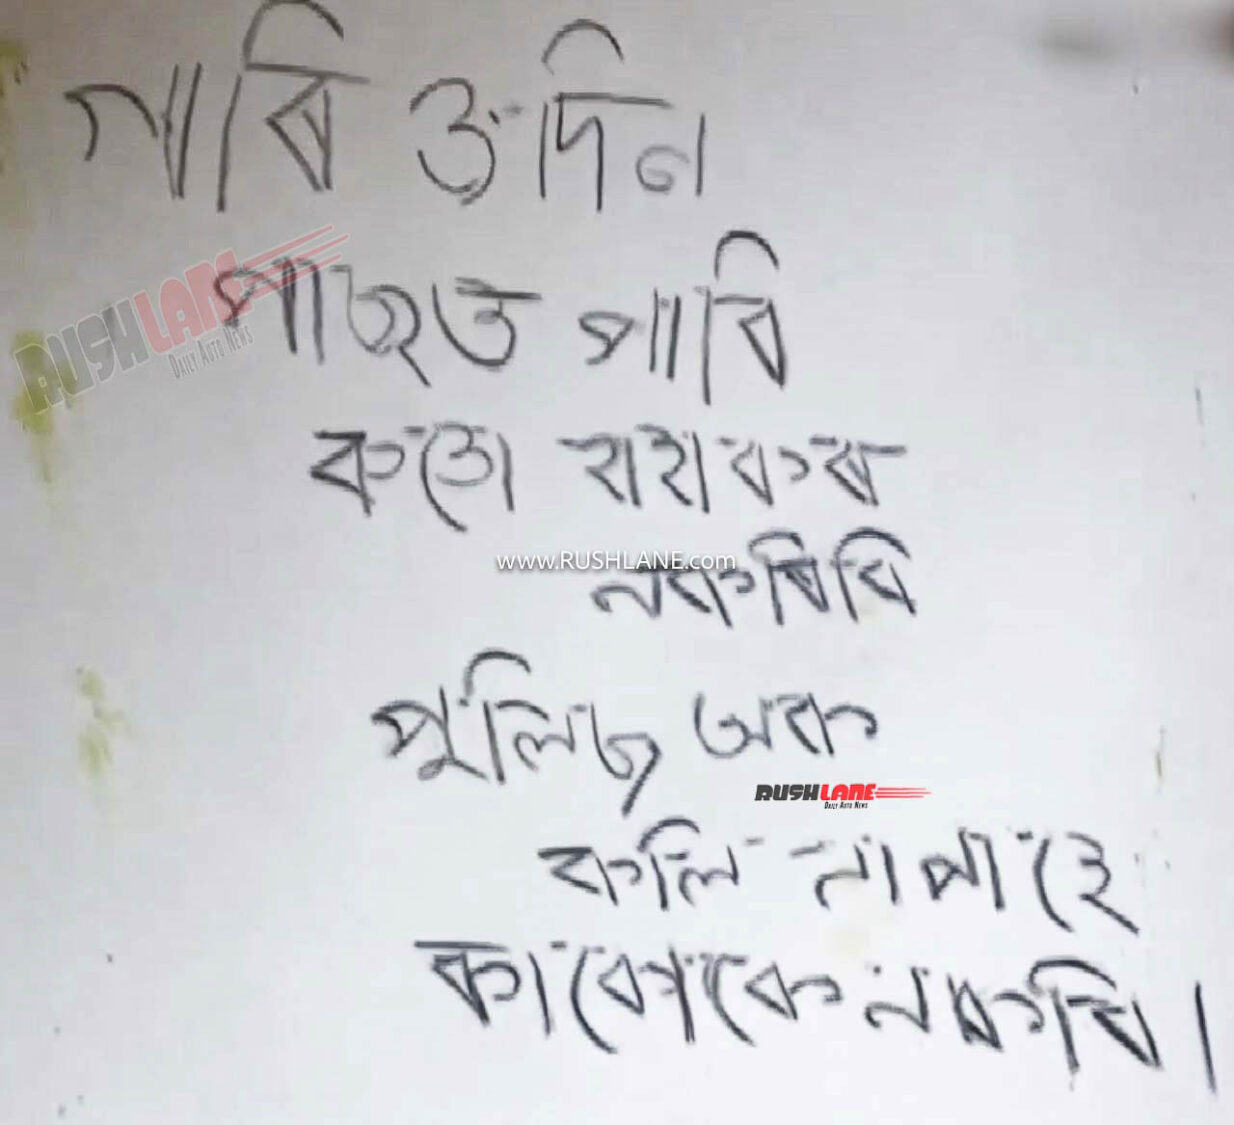 Maruti Brezza Stolen - Thieves leave a note on wall